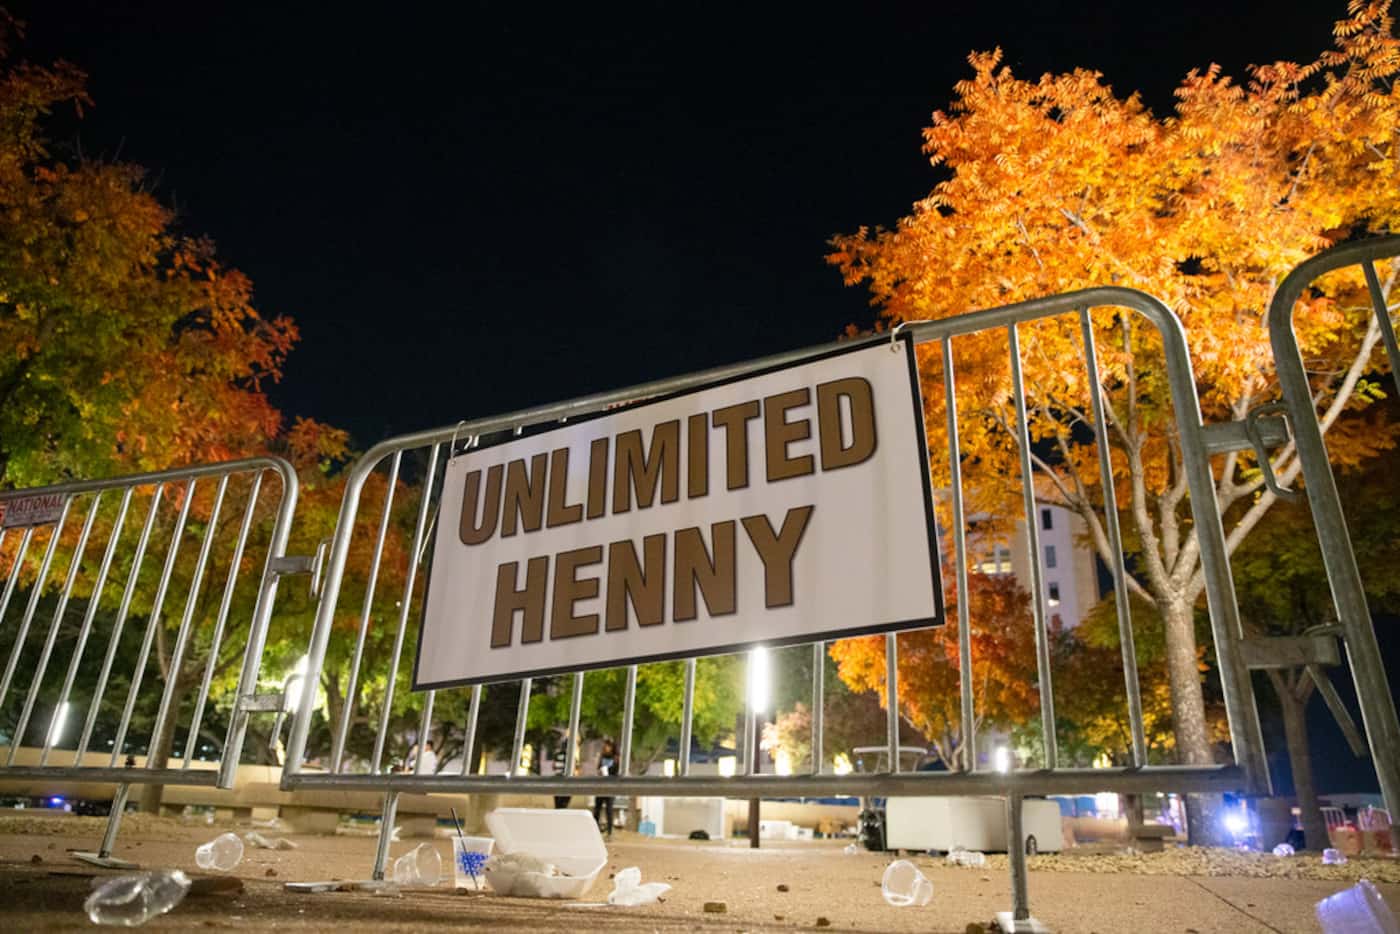 Attendees at Hennything Fest got unruly and rushed the exits after rumors of gunshots broke...